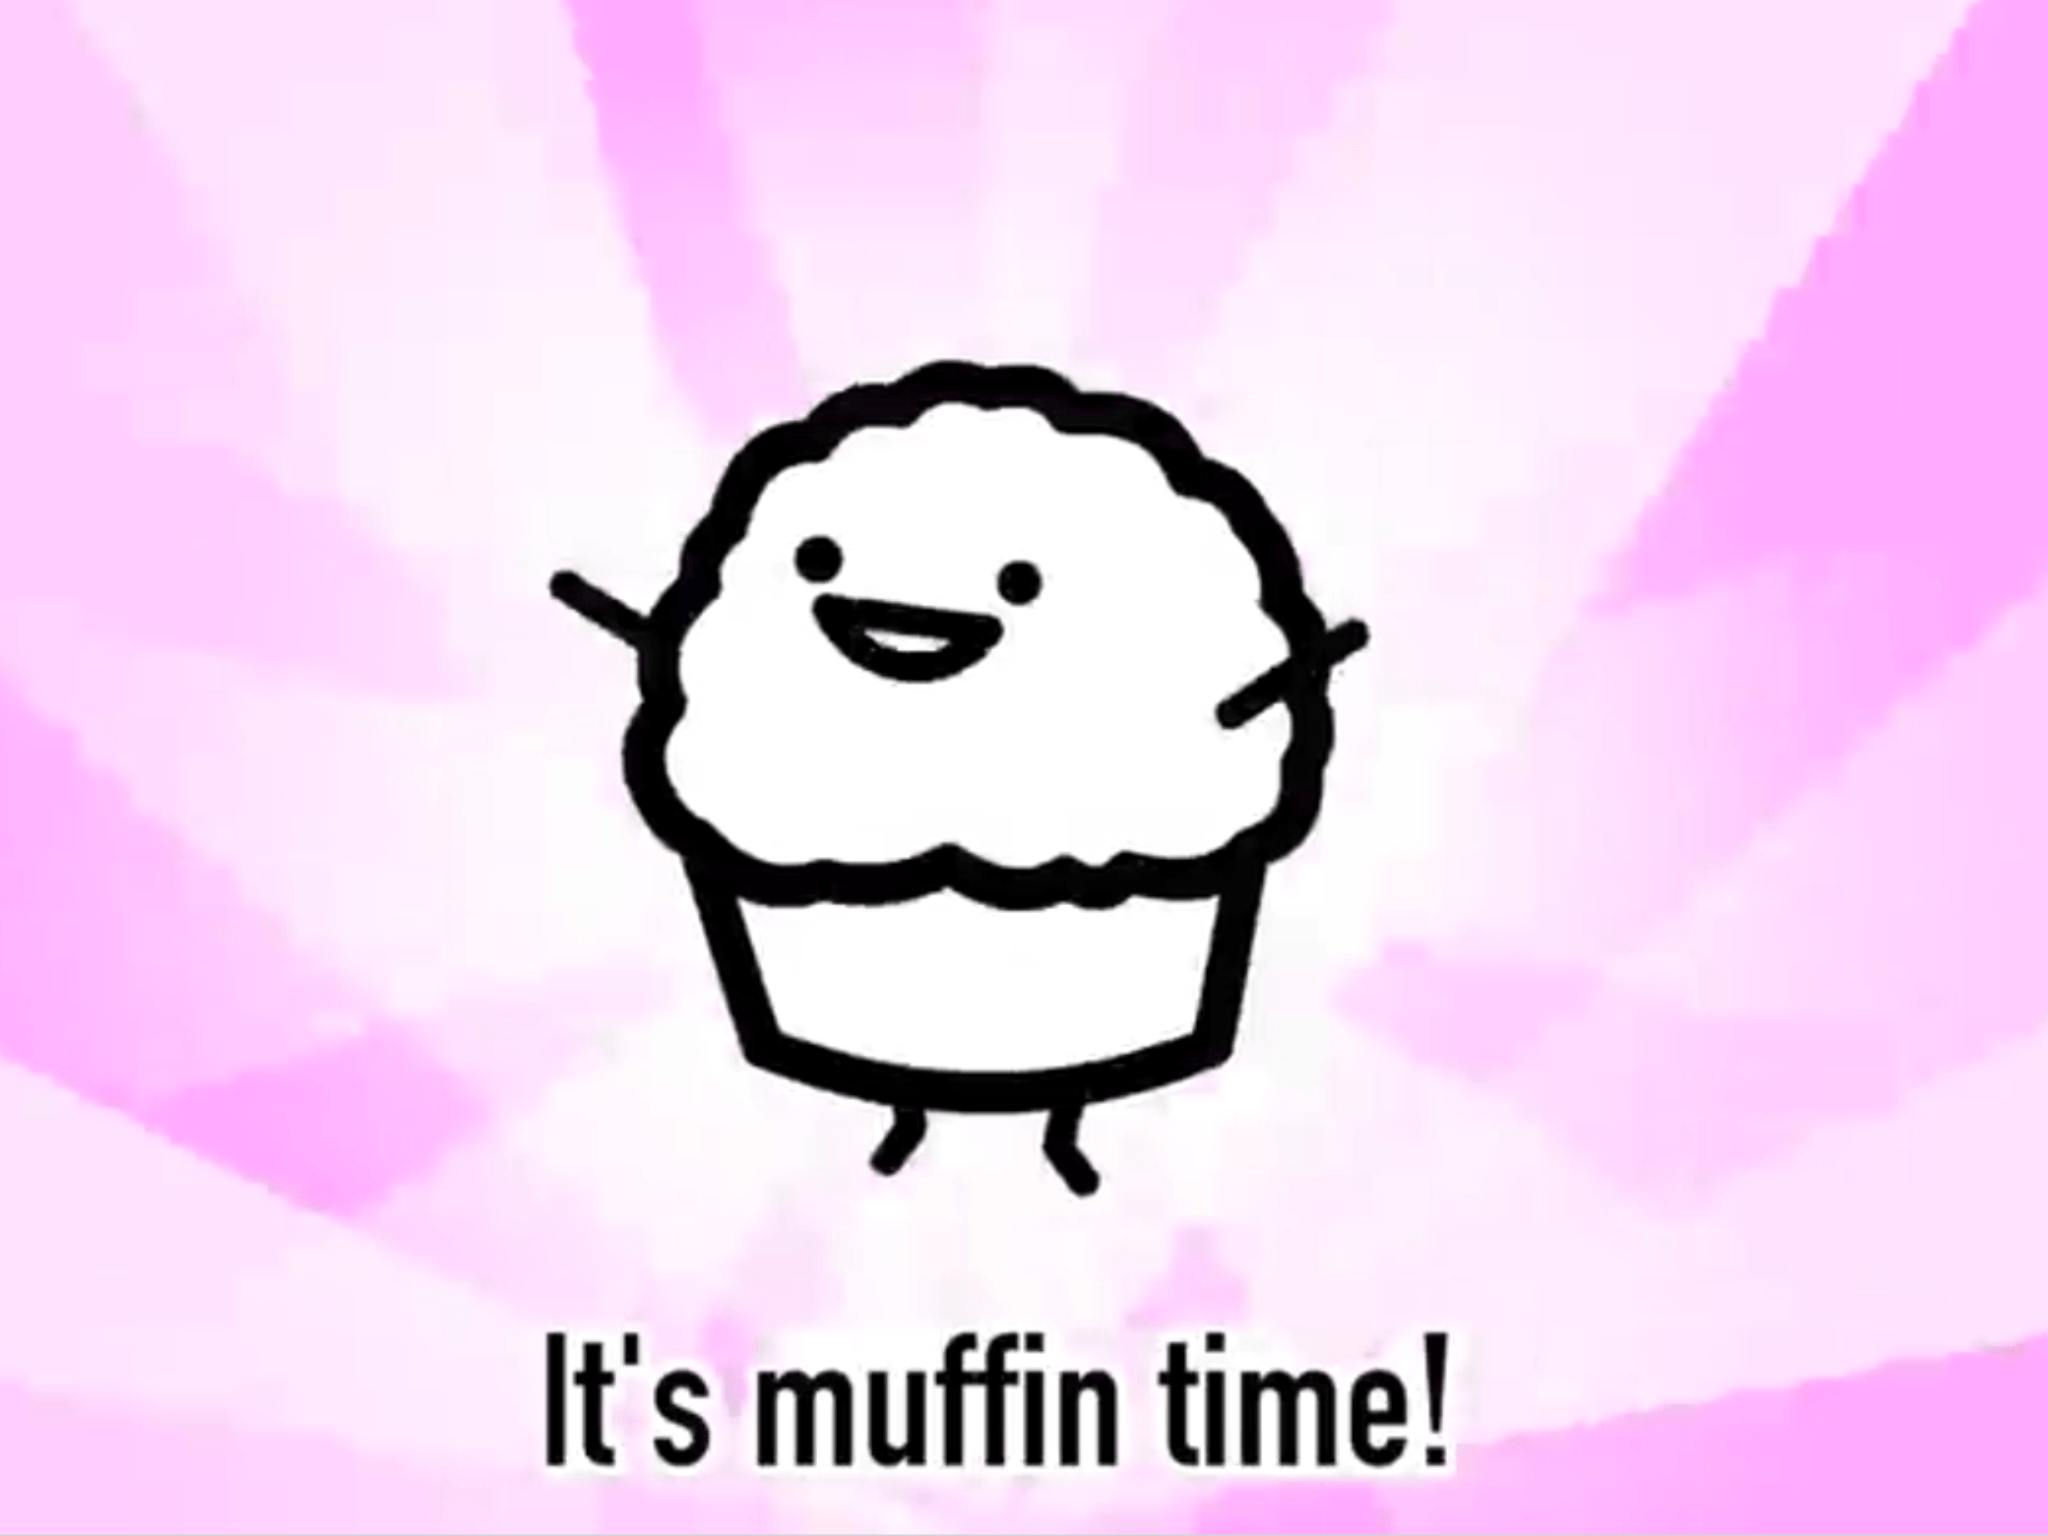 ASDF It's Muffin Time remix on youtube. Audrey's. Asdf